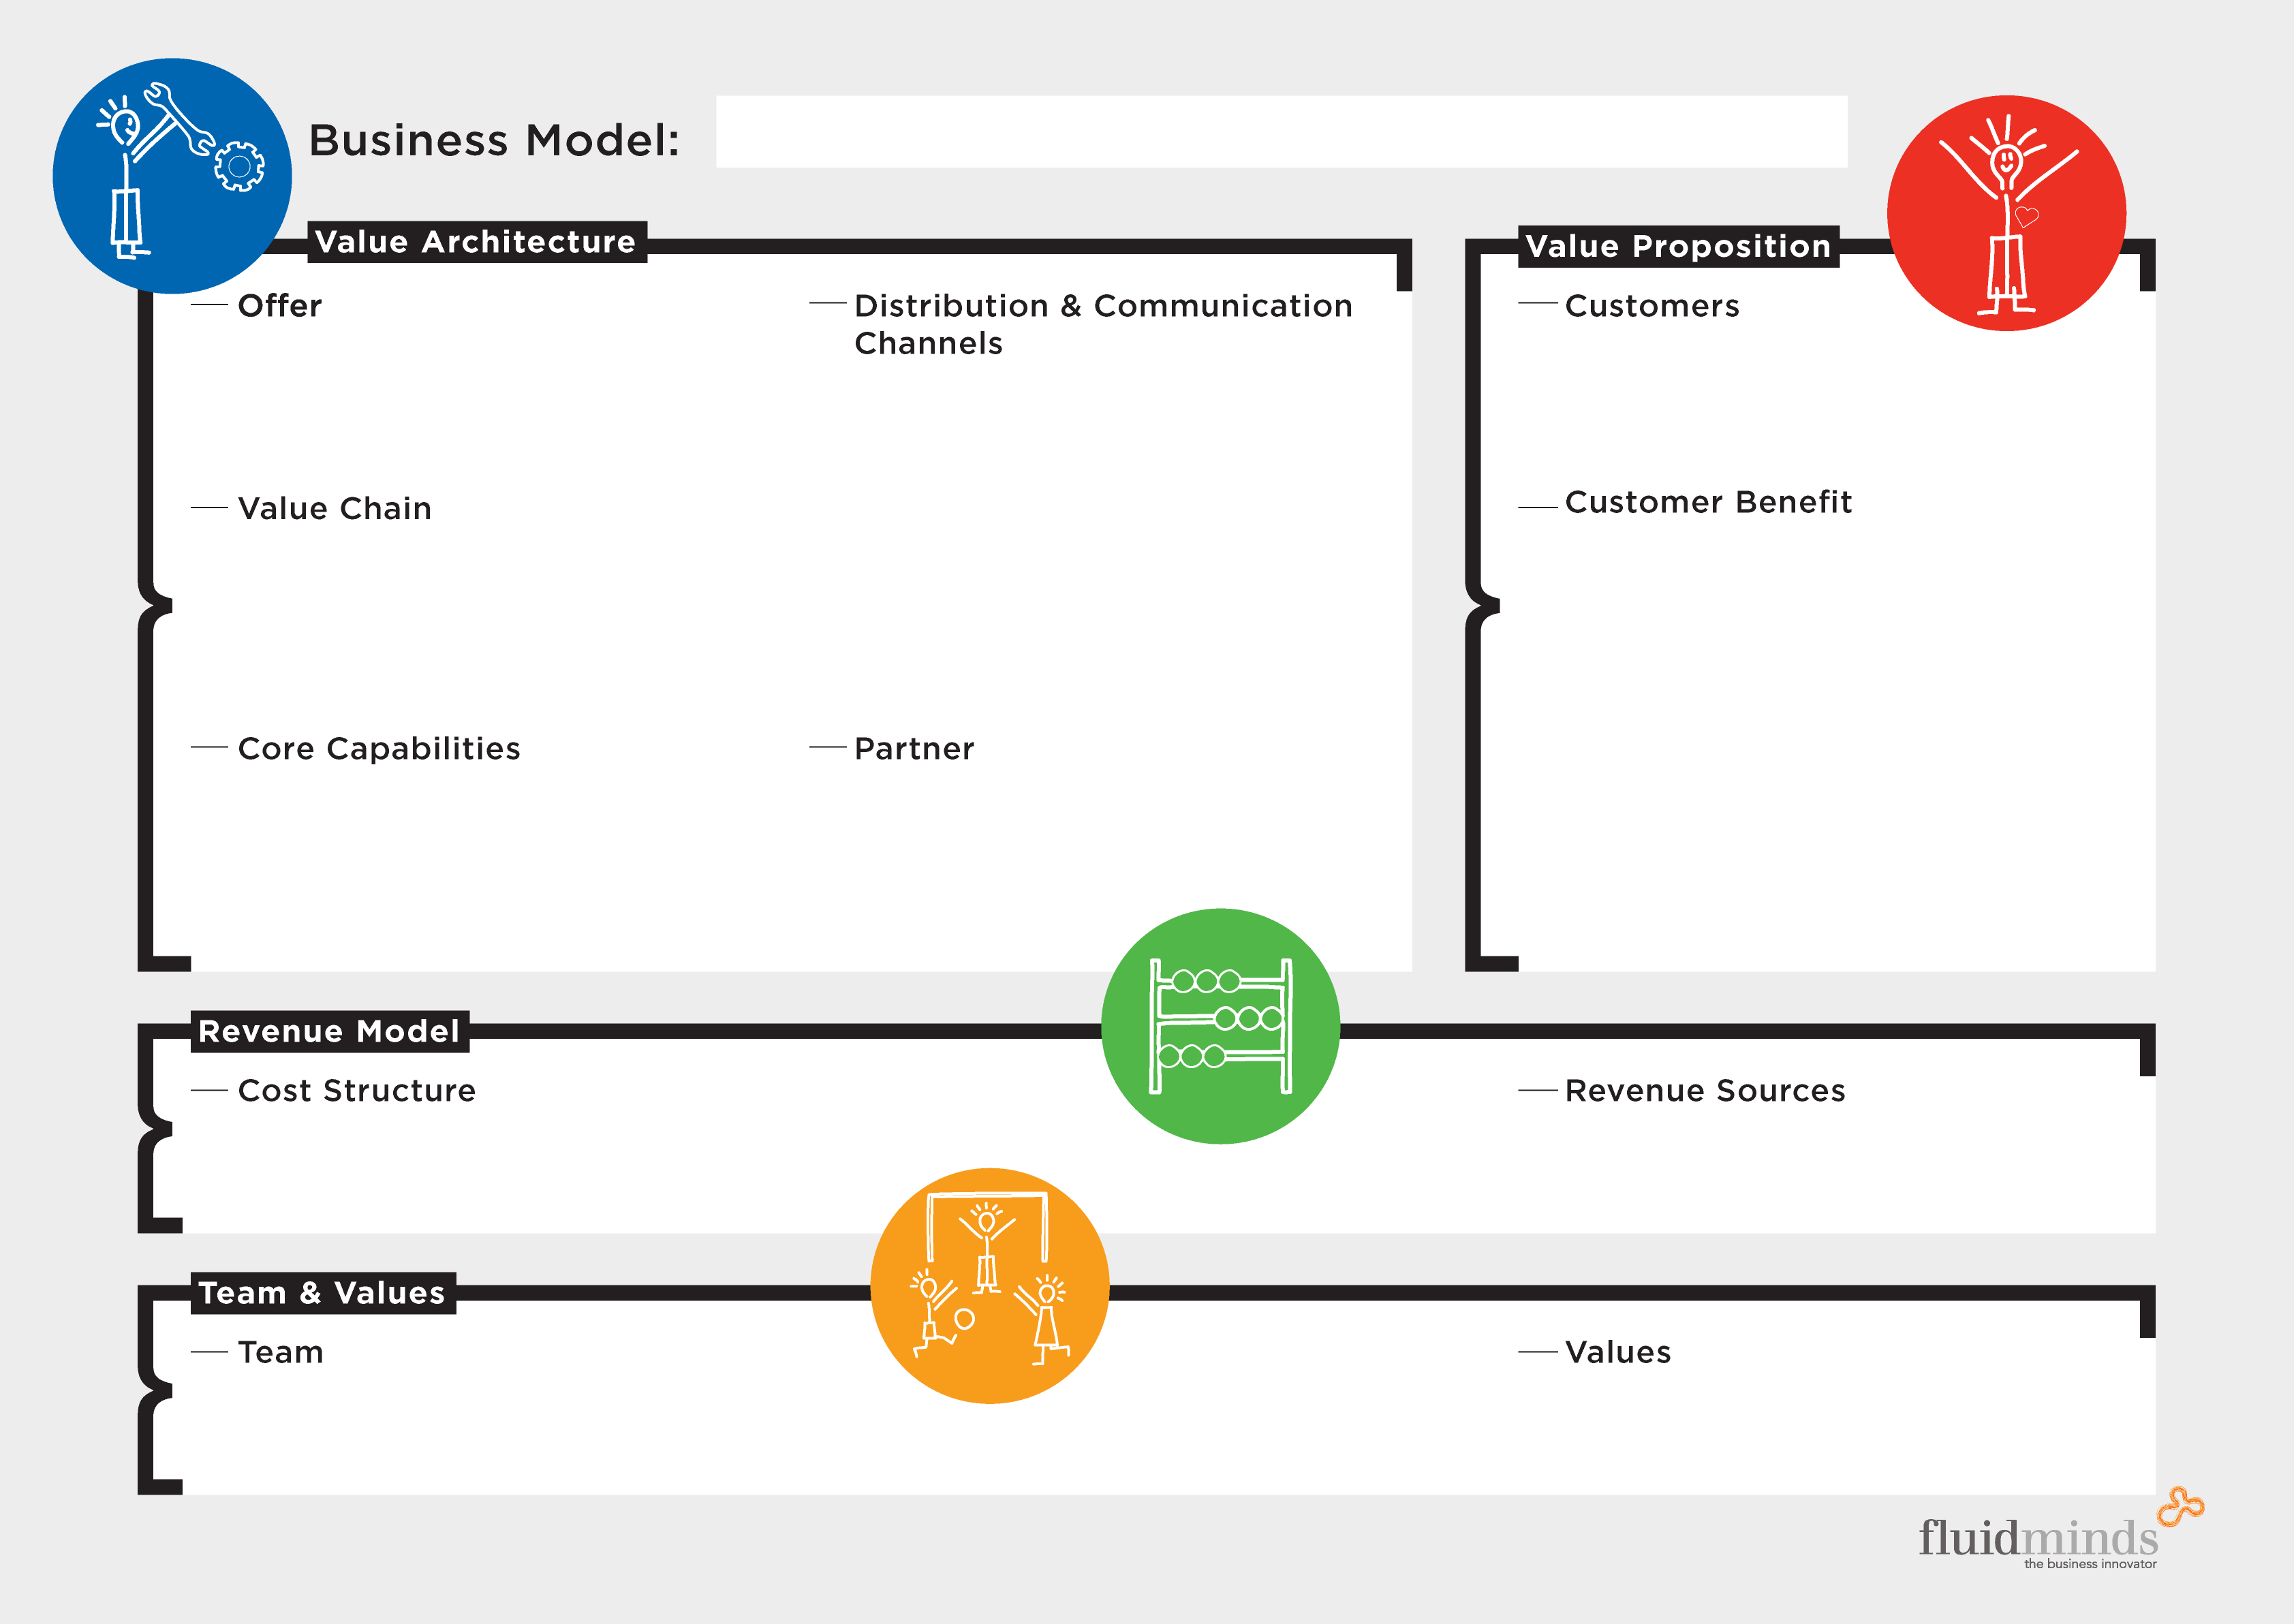 Our favorite Business Model tools - Board of Innovation